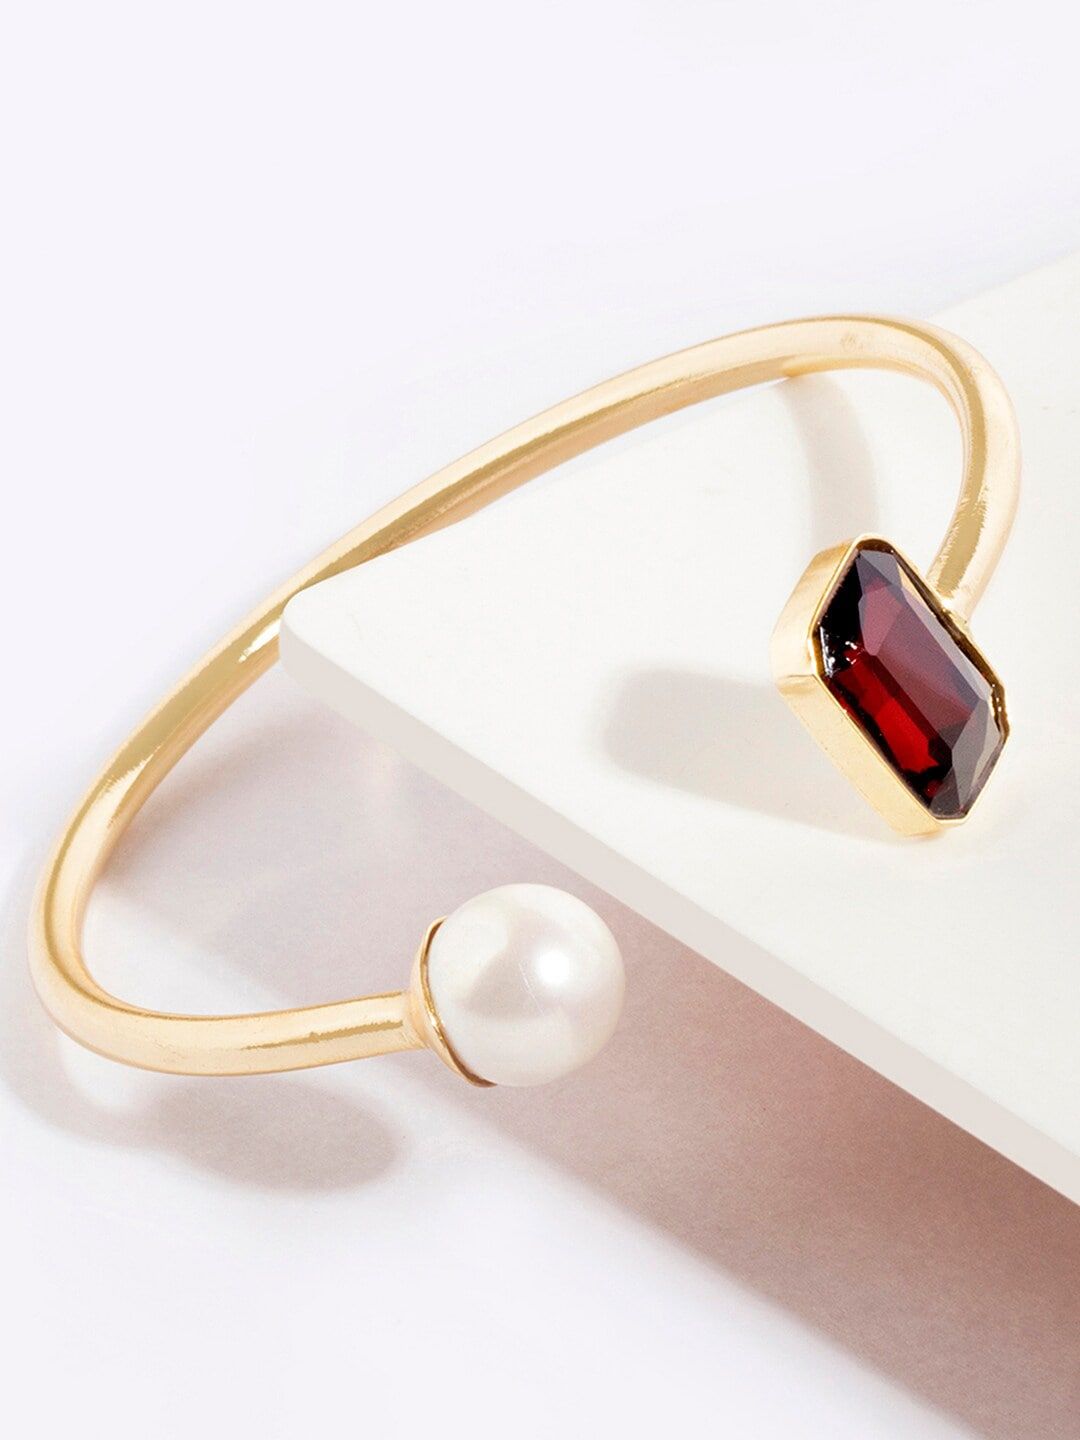 Mikoto by FableStreet Women Gold-Toned & Octagonal Red Crystal & Pearl Cuff Bracelet Price in India